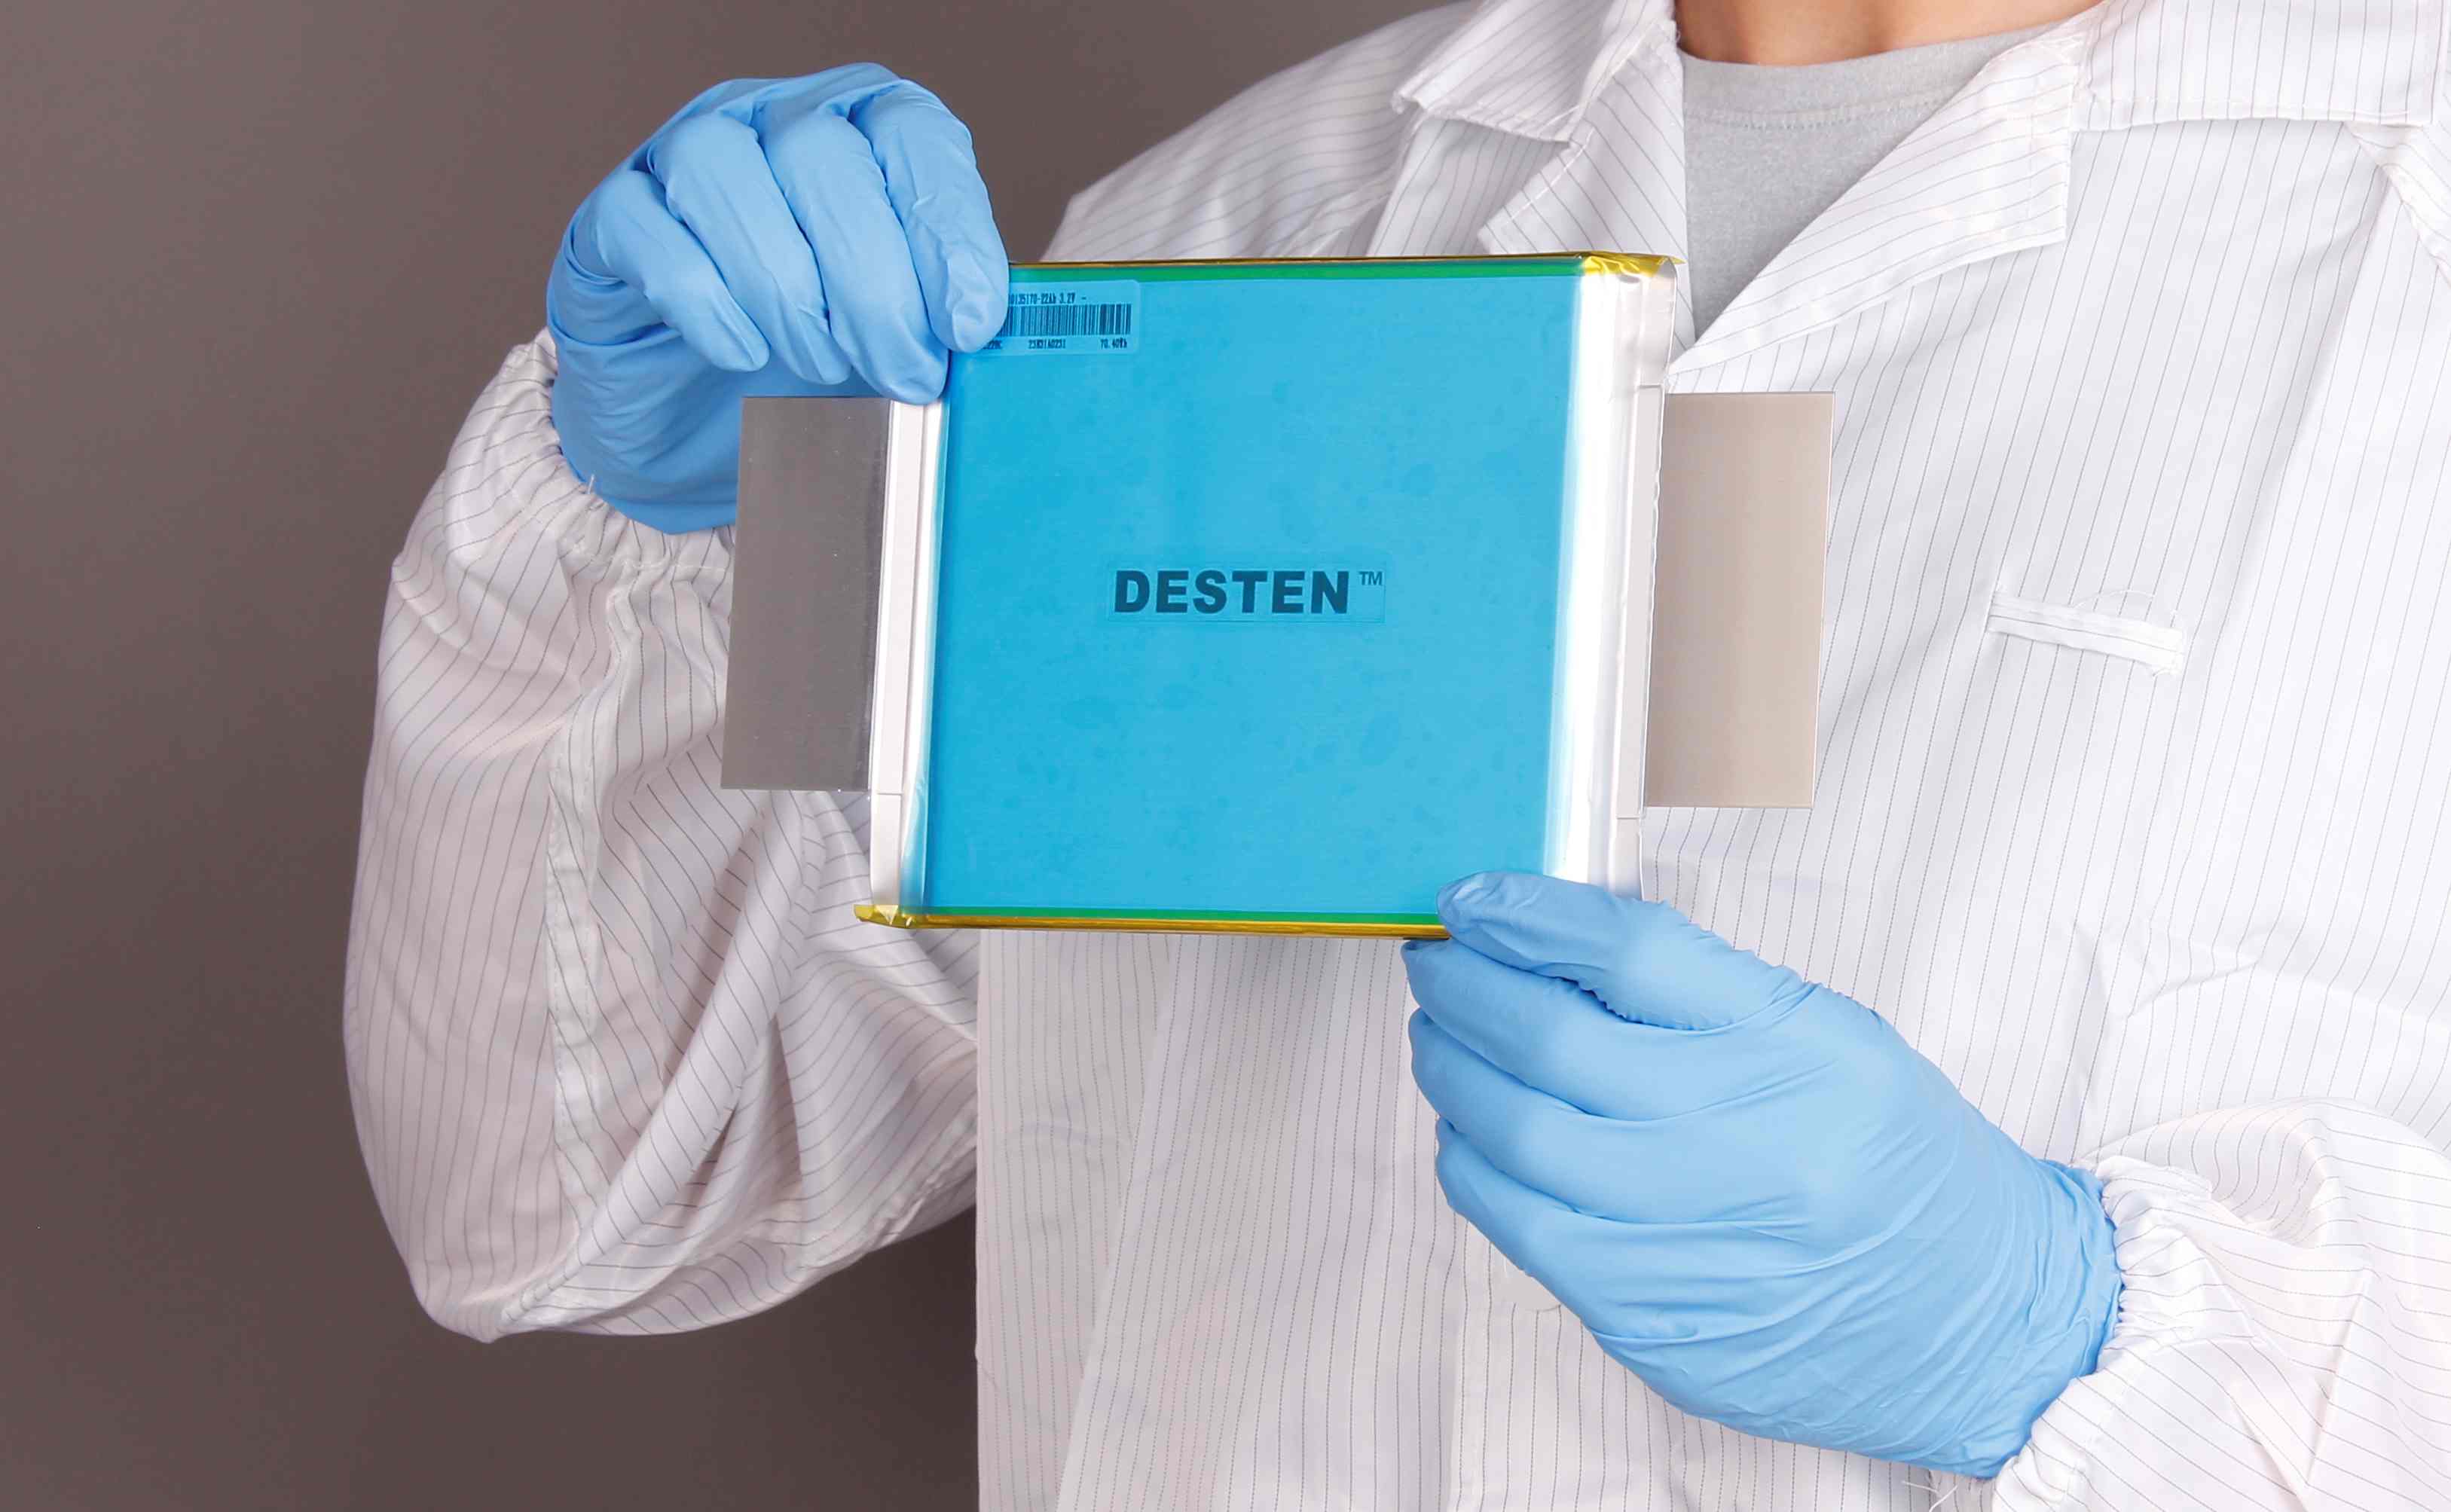 Desten’s 22Ah 6C/6C lithium iron phosphate, pouch format cell. Photo: Business Wire